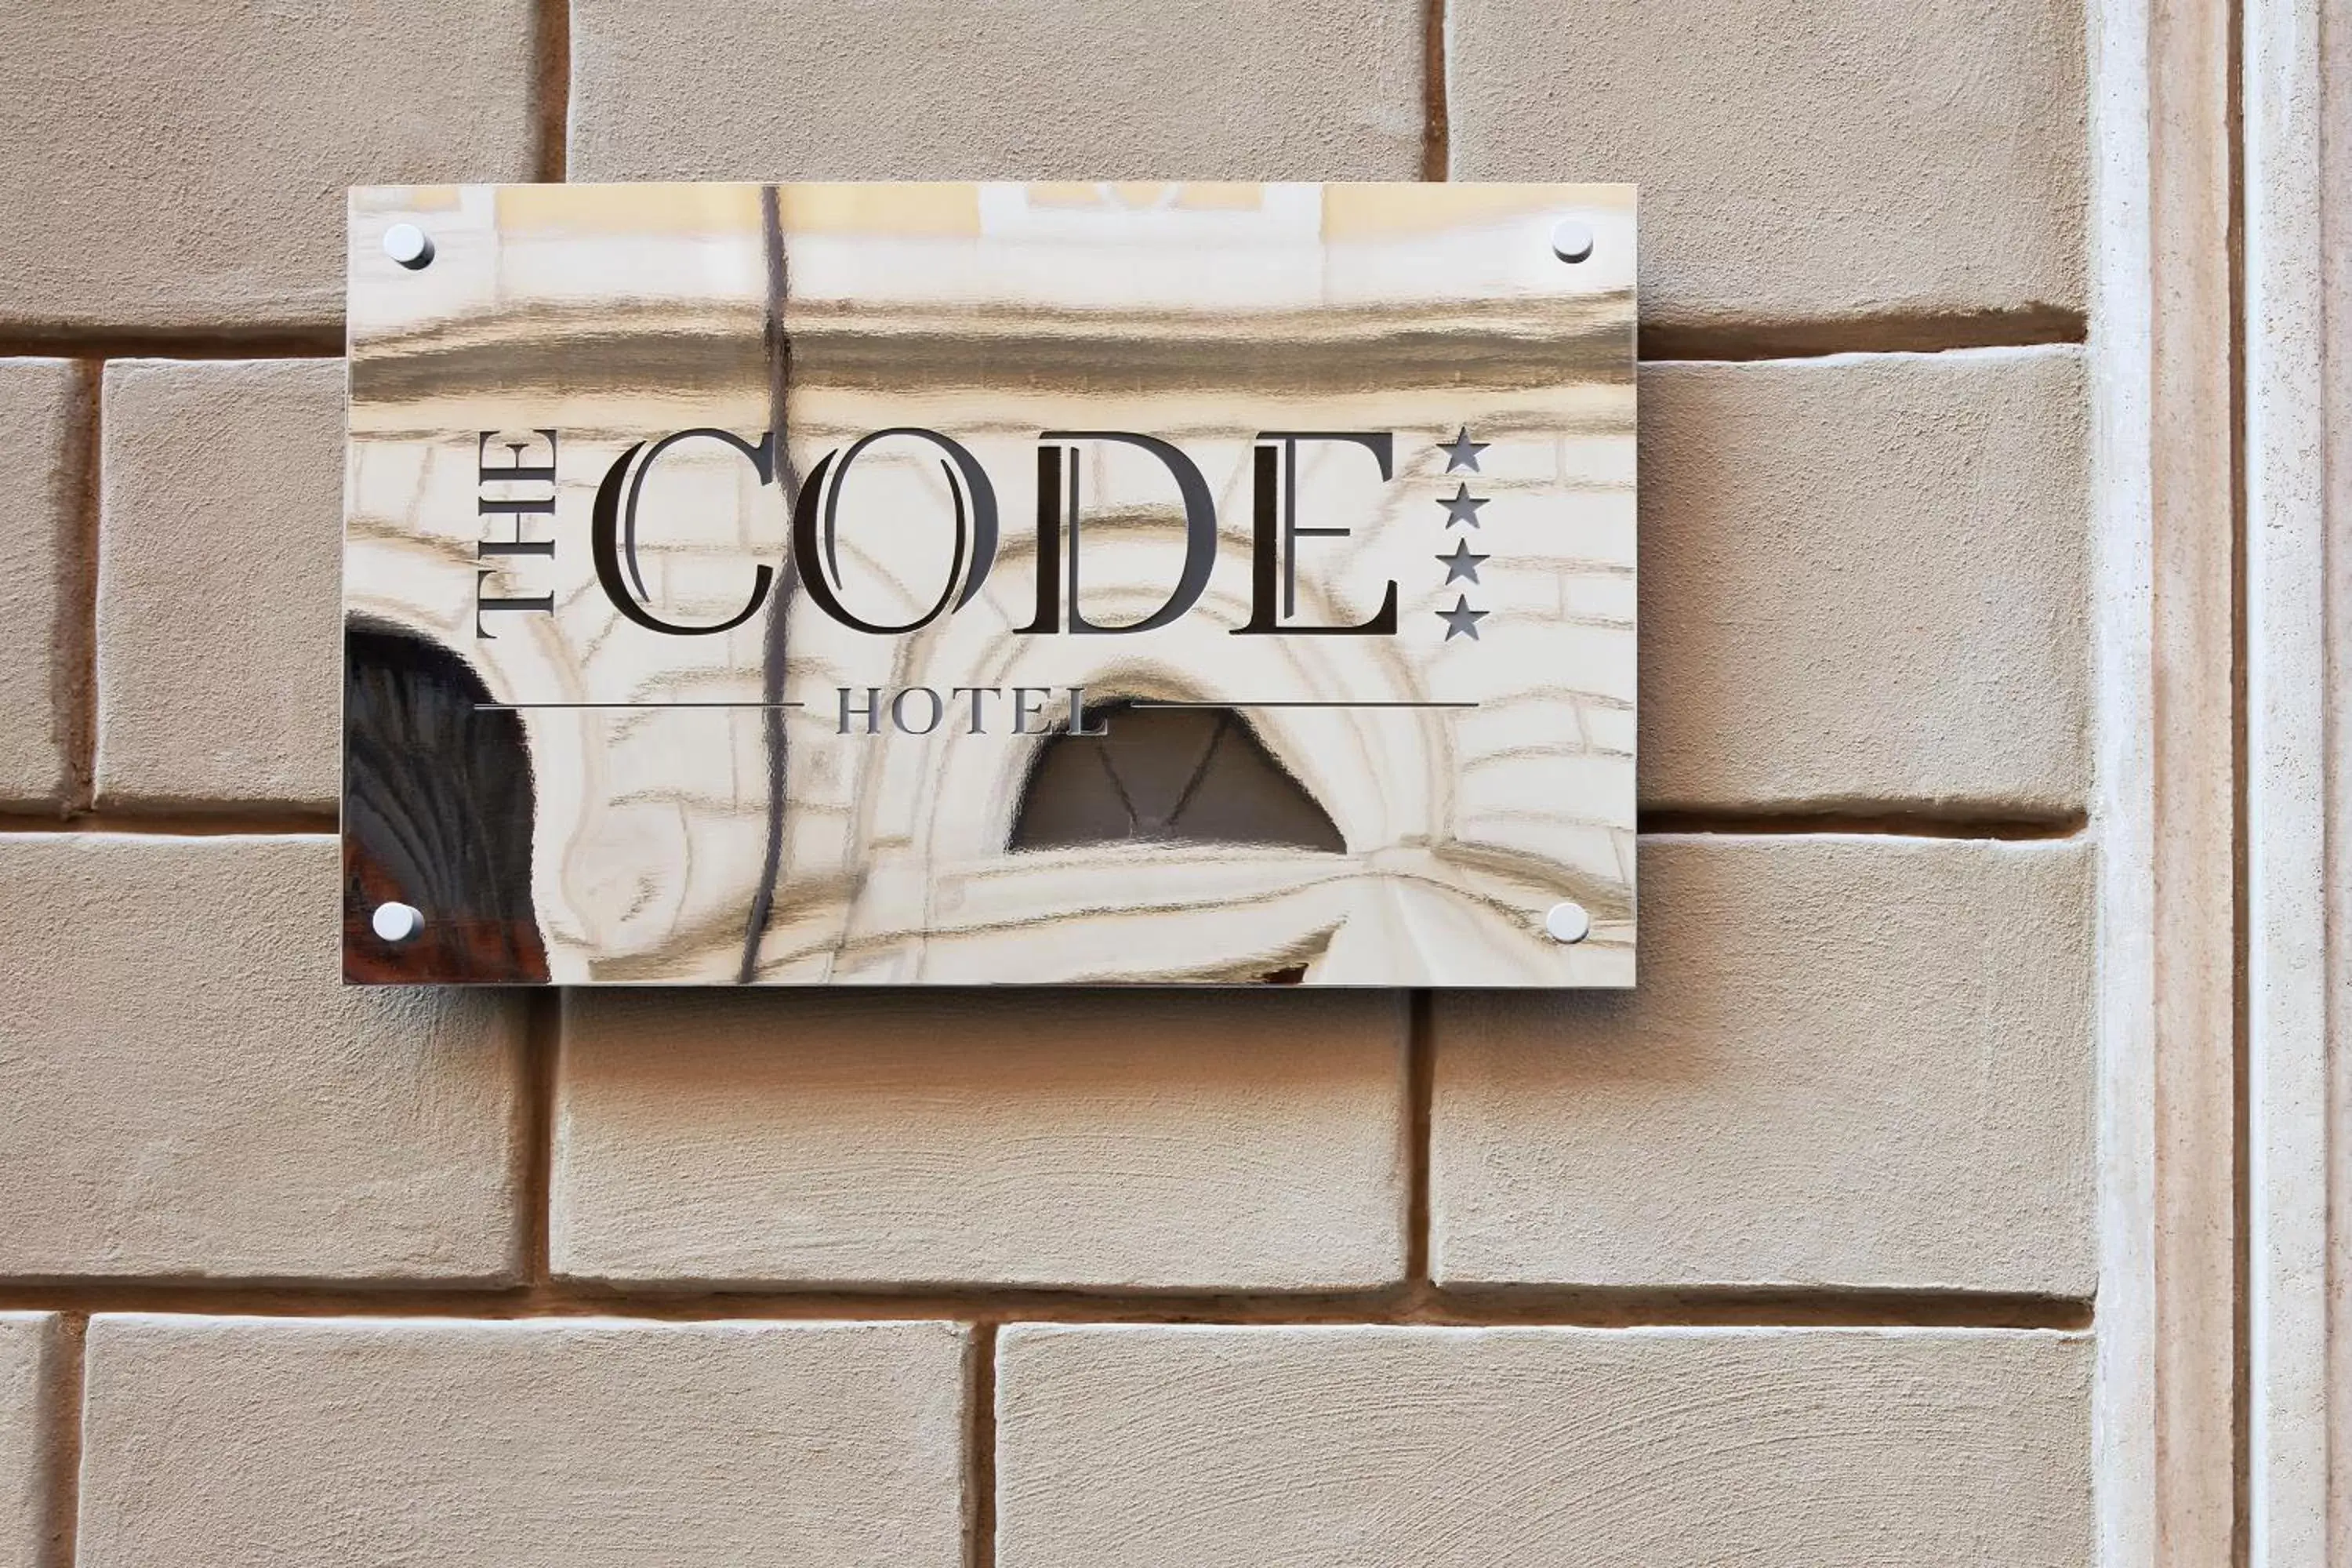 Property building in The Code Hotel